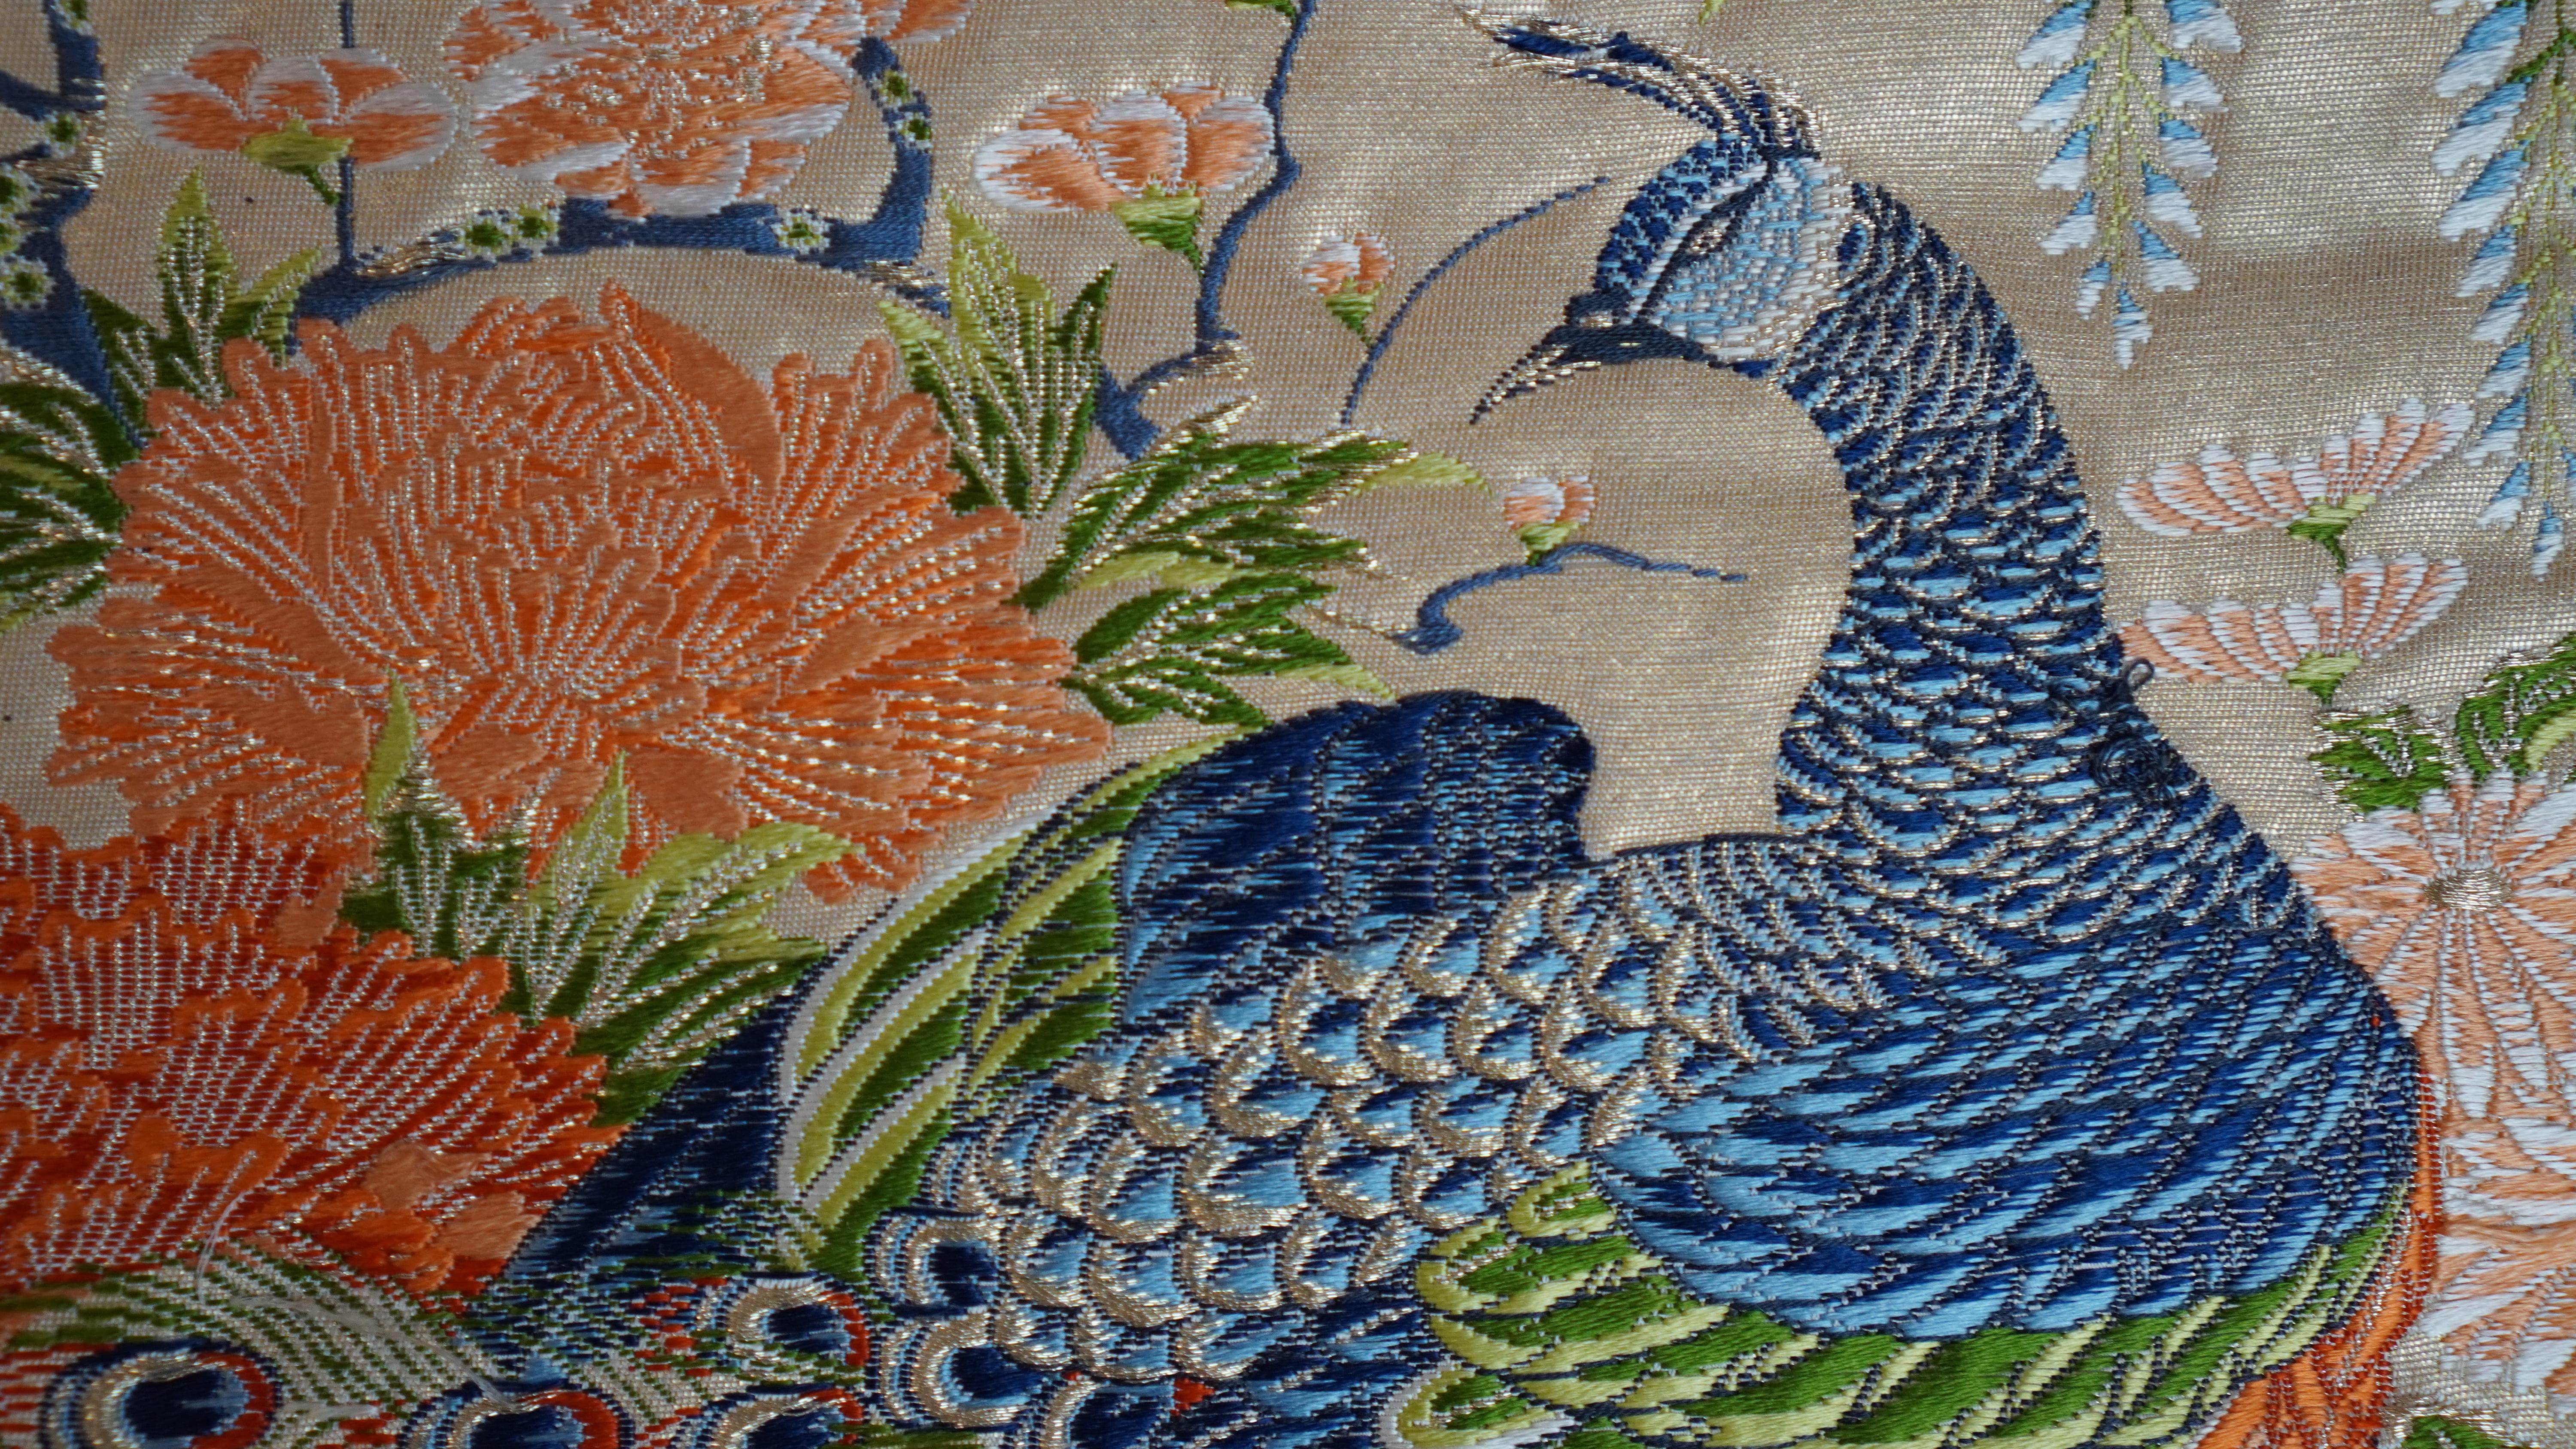 This Japanese kimono tapestry is the only one of its kind in the world. It has been carefully and meticulously embroidered by Japanese craftsmen.

We are proud to present this Kimono tapestry, embroidered with peacocks and flowers of the four